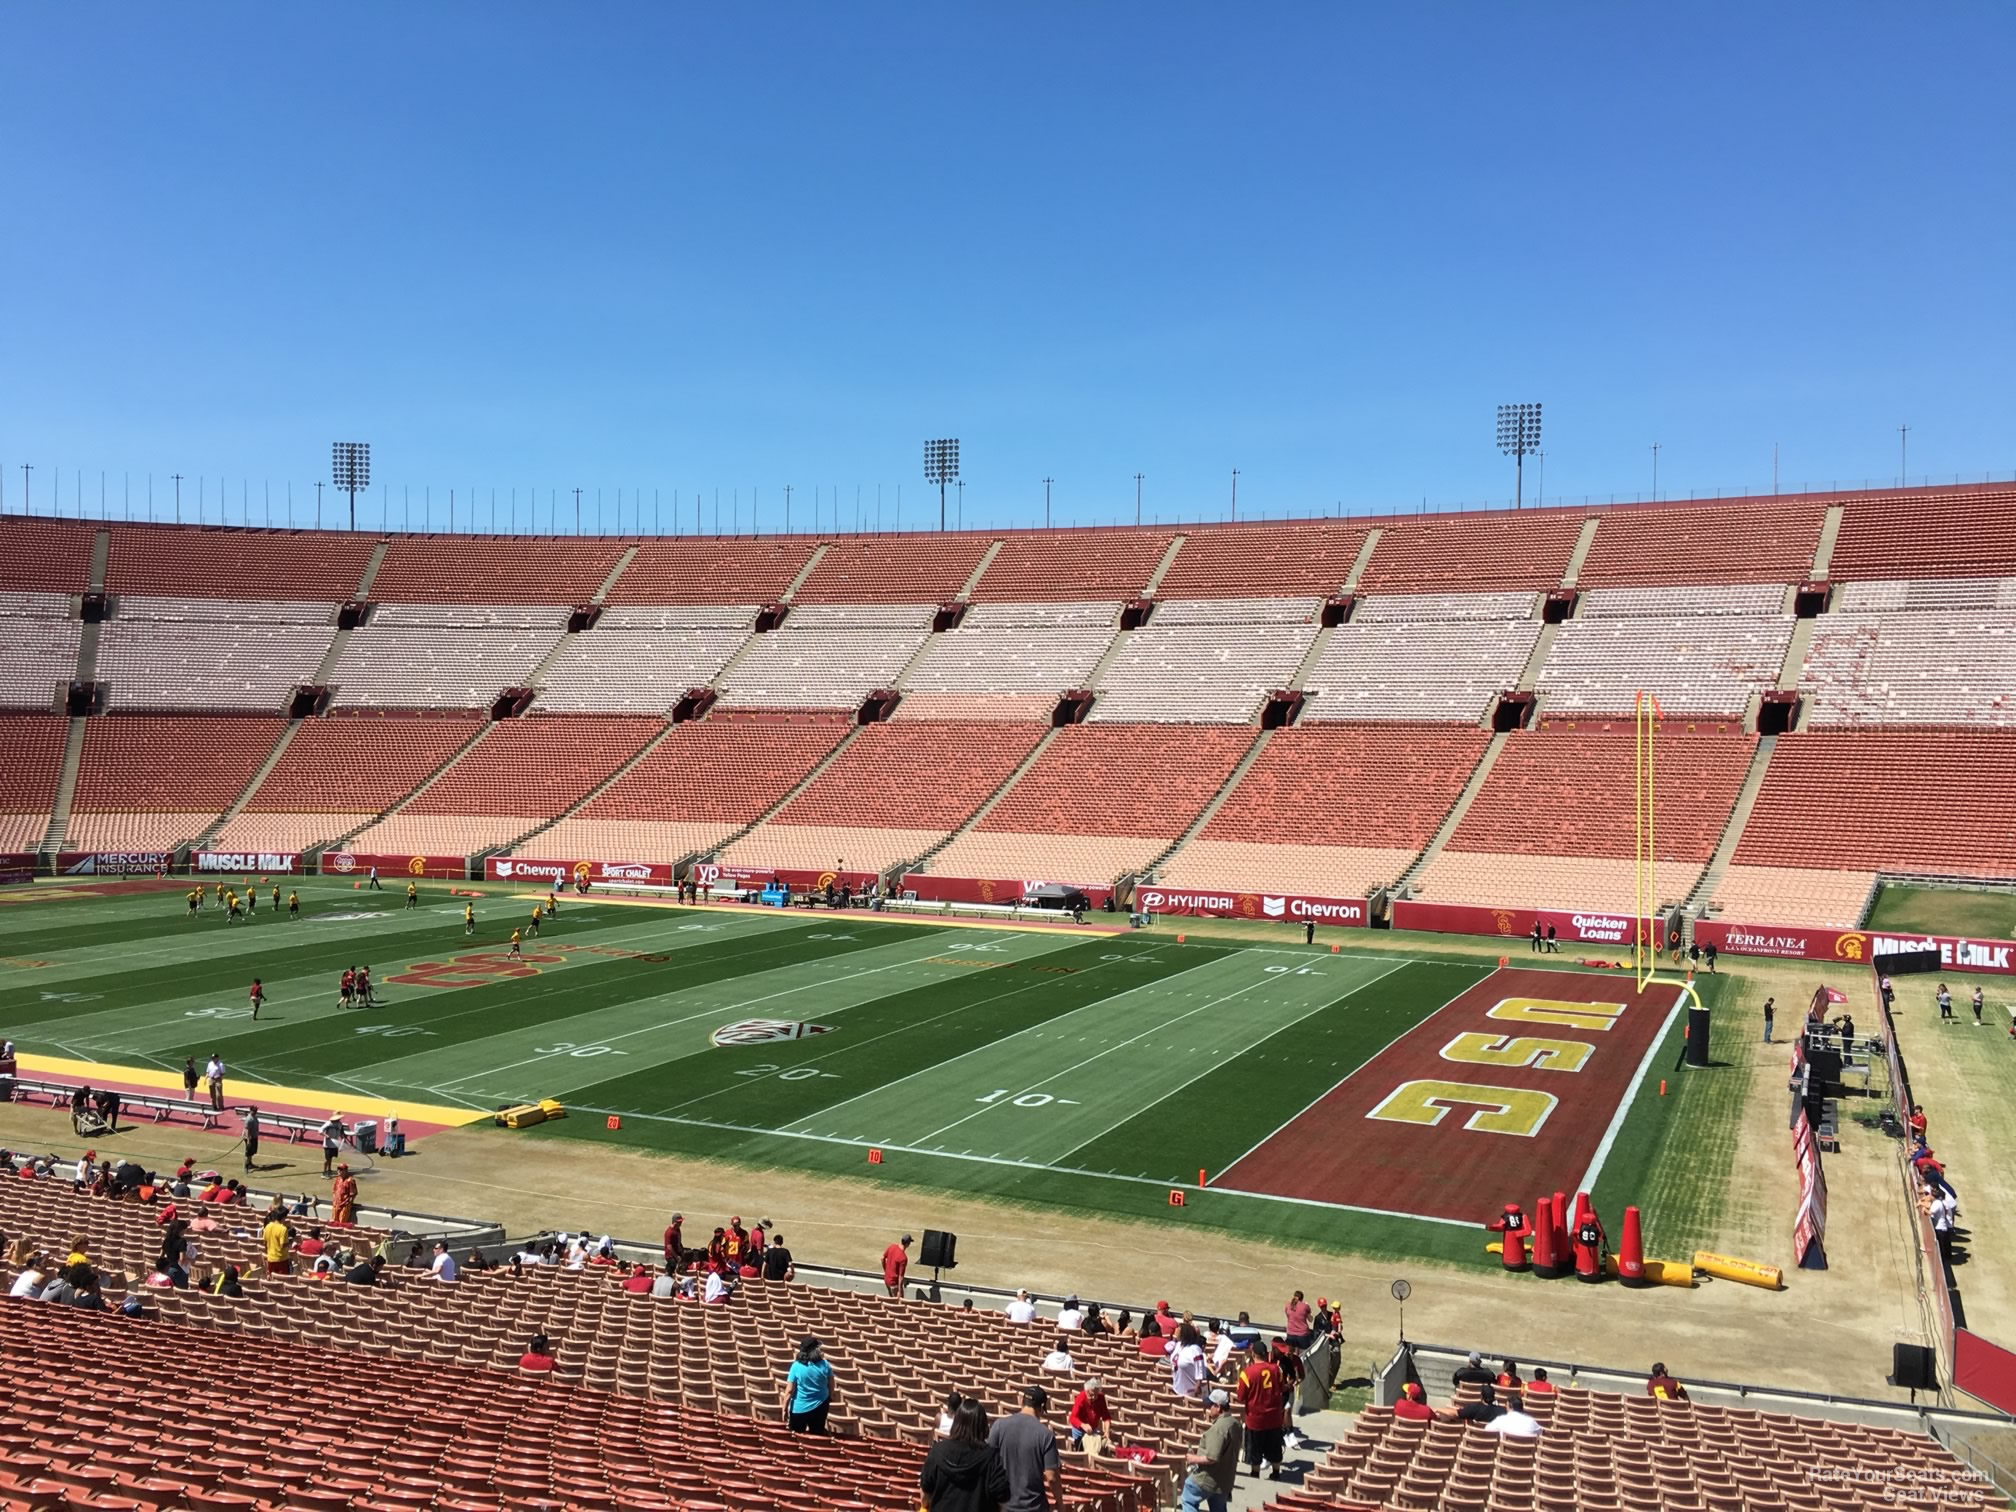 section 203b, row 2 seat view  - los angeles memorial coliseum